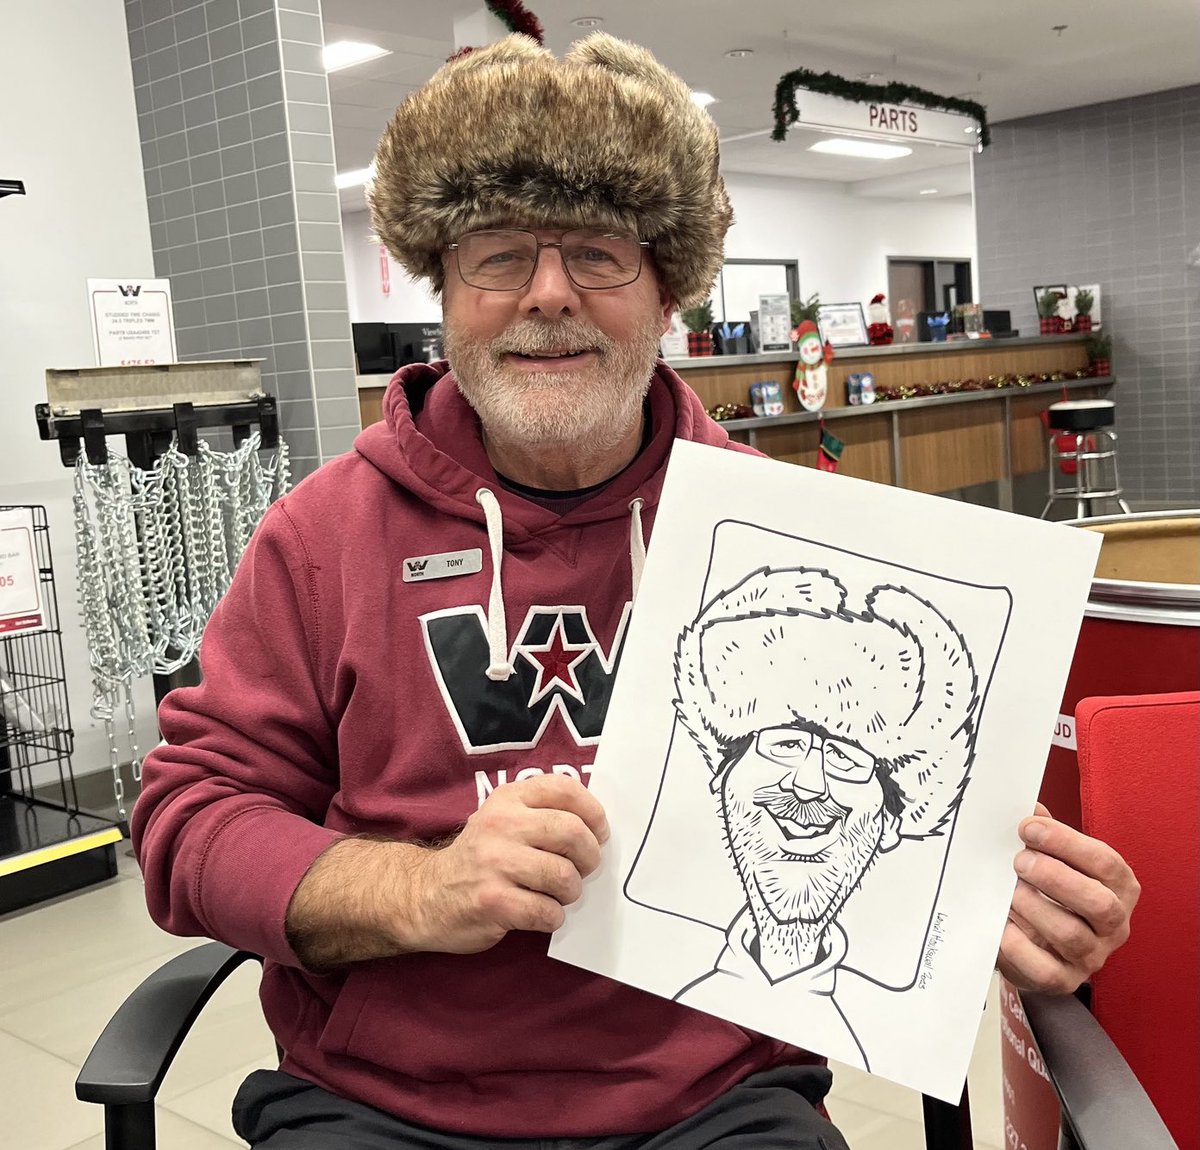 A great afternoon this past Wednesday drawing for Western Star Trucks during their Christmas Toy Donation Day! More caricatures to draw this weekend! #Yeg #art #cartoon #caricature #YegEvents #YegArtists #Christmas #toys #joy #EventIdeas #EventPlanning